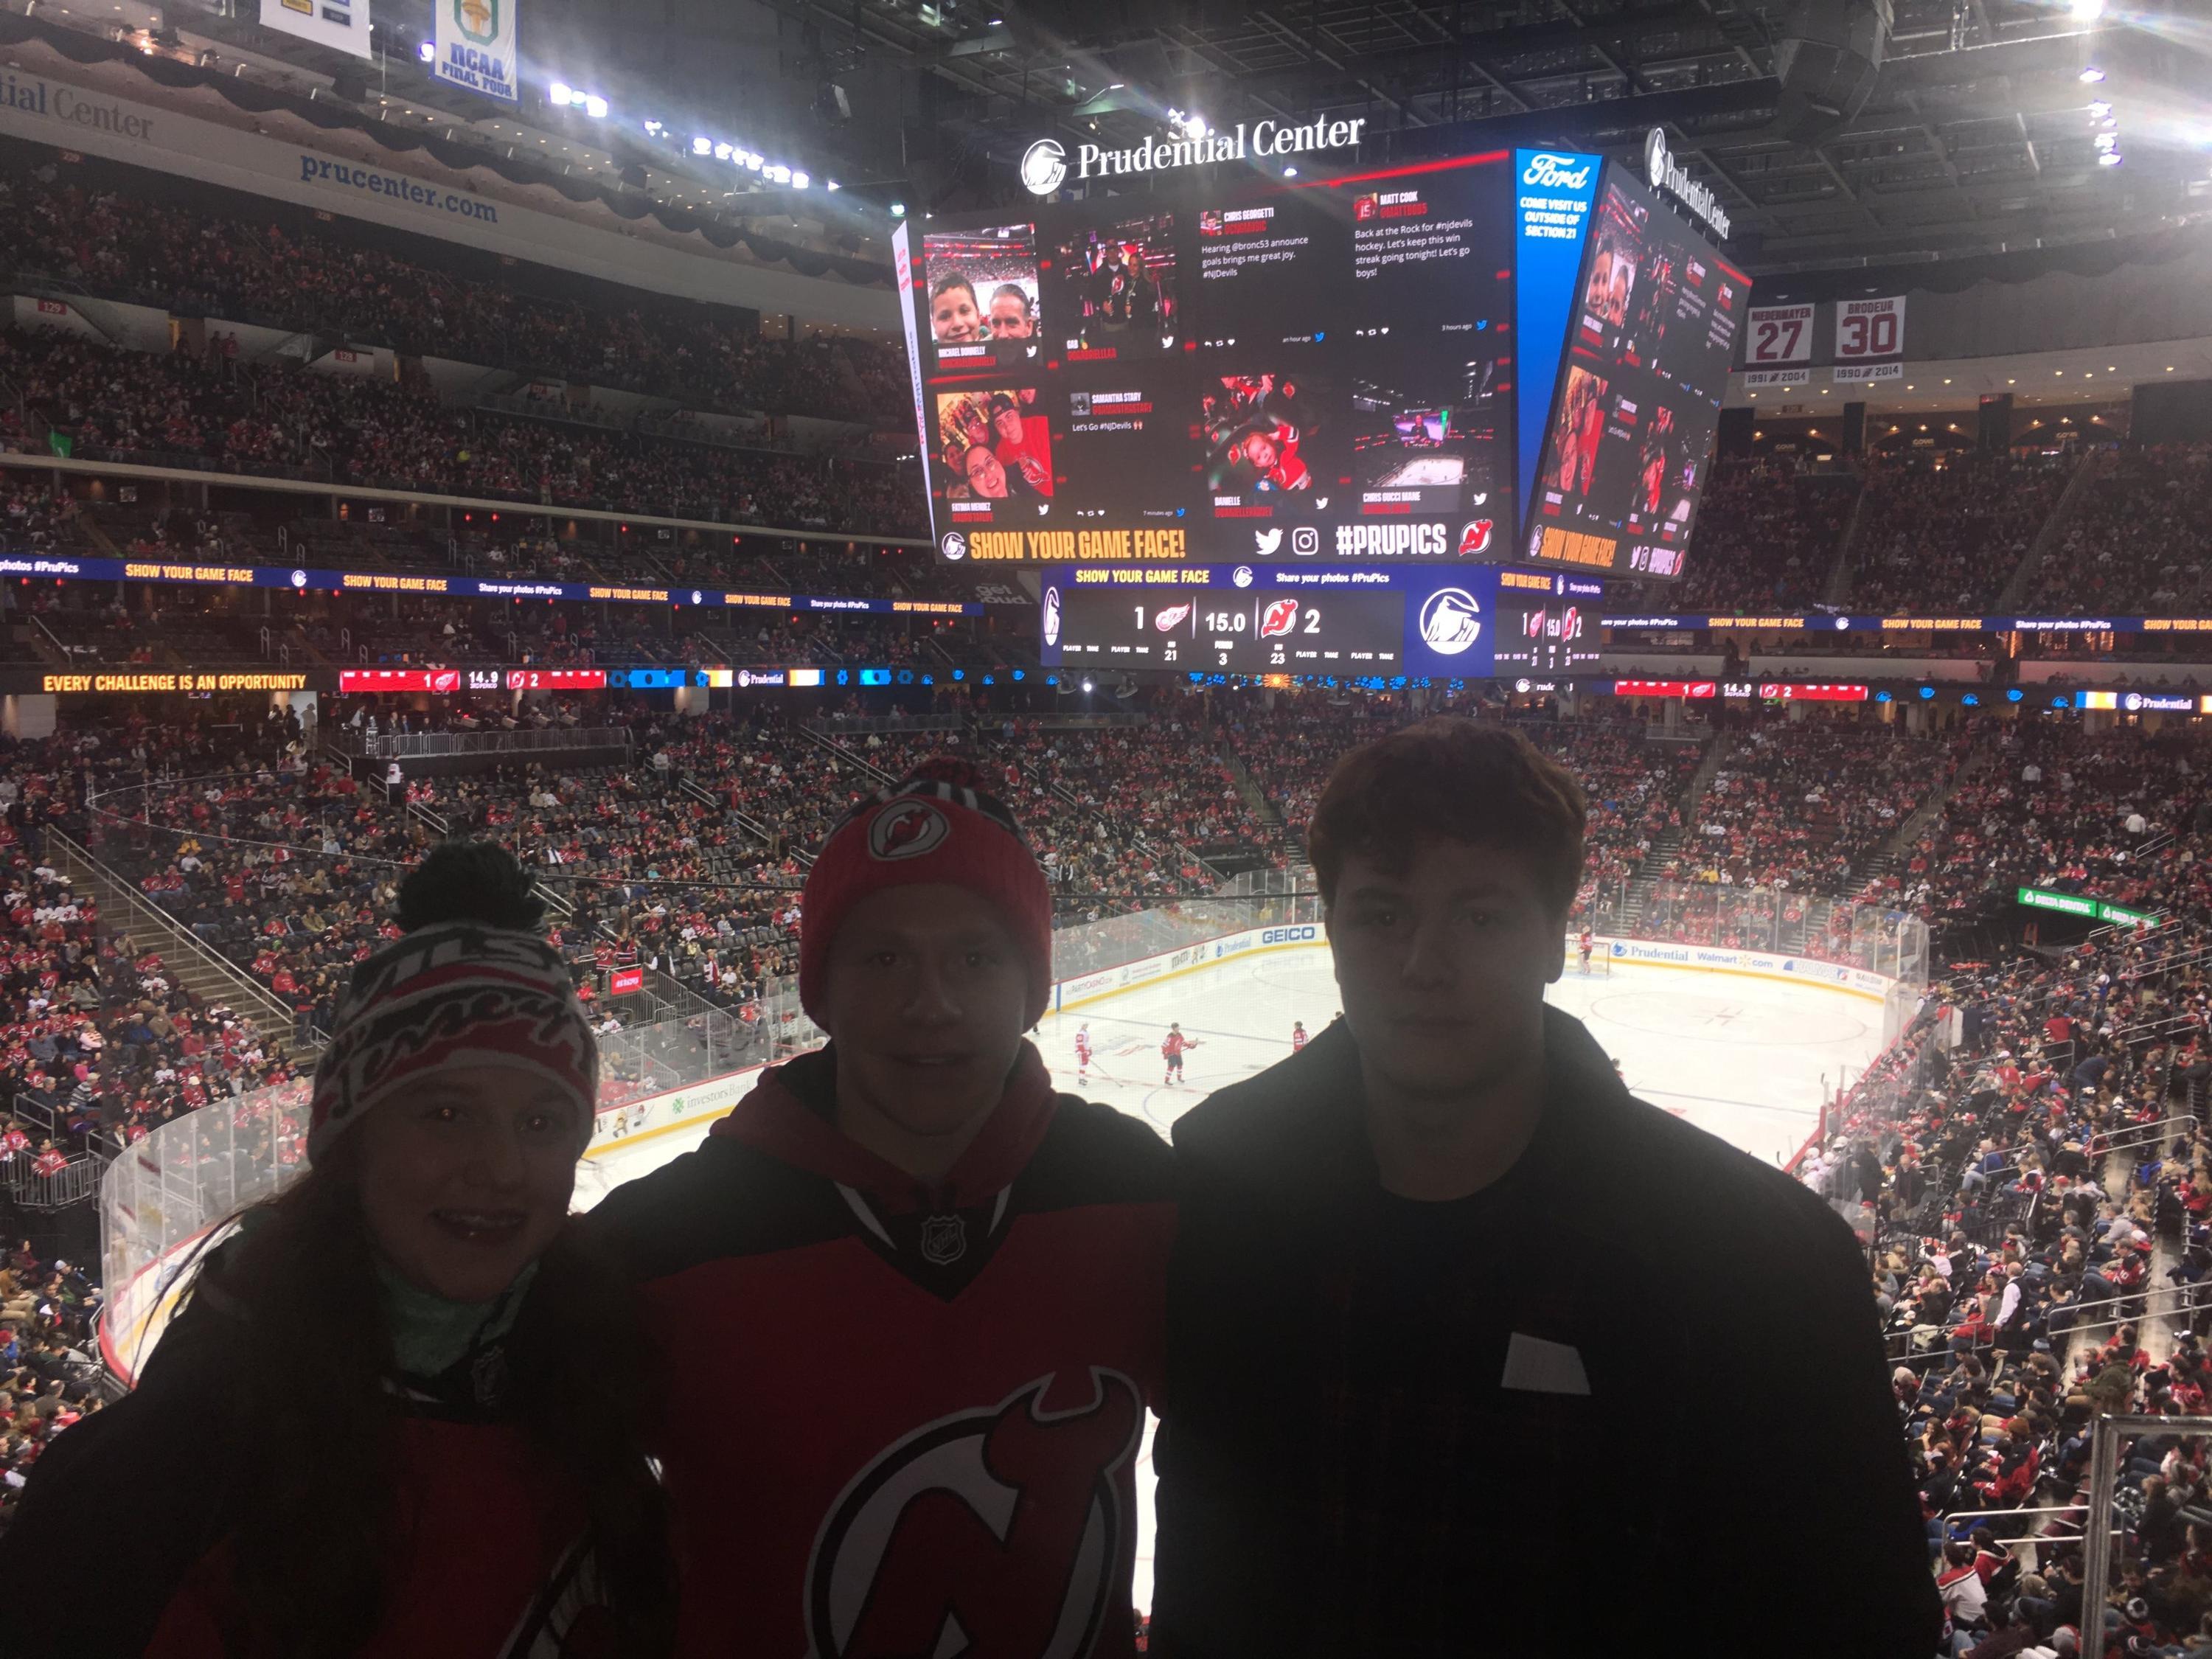 Section 128 at Prudential Center 